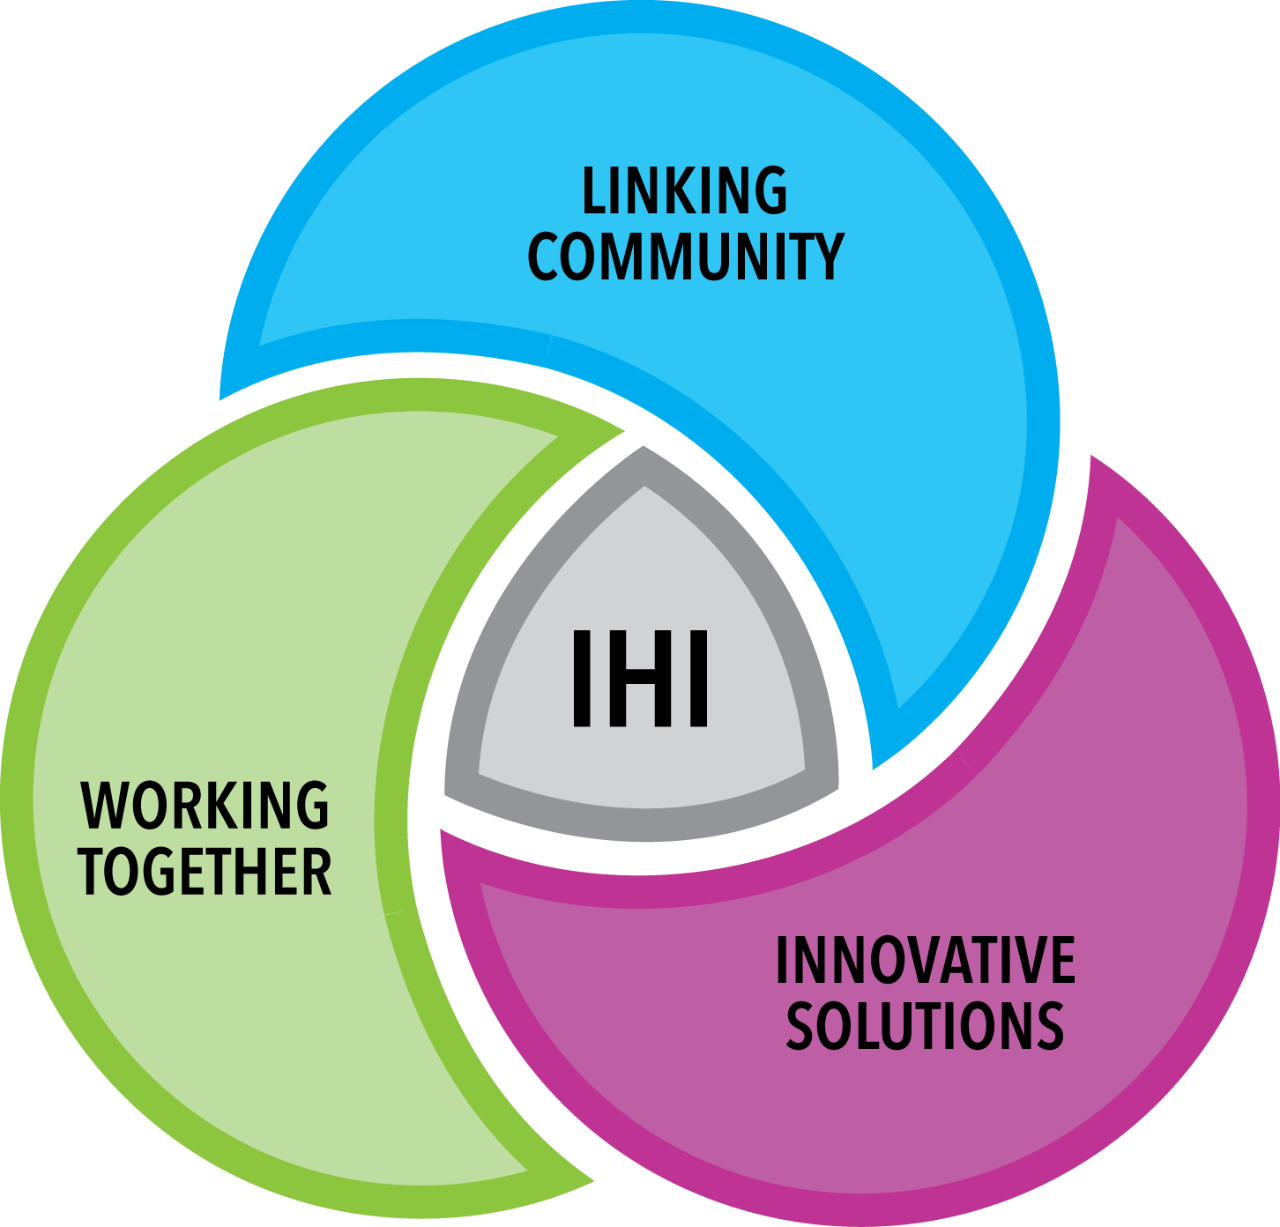 Venn diagram with IHI in the middle surrounded by linking community, working together, and innovative solutions.